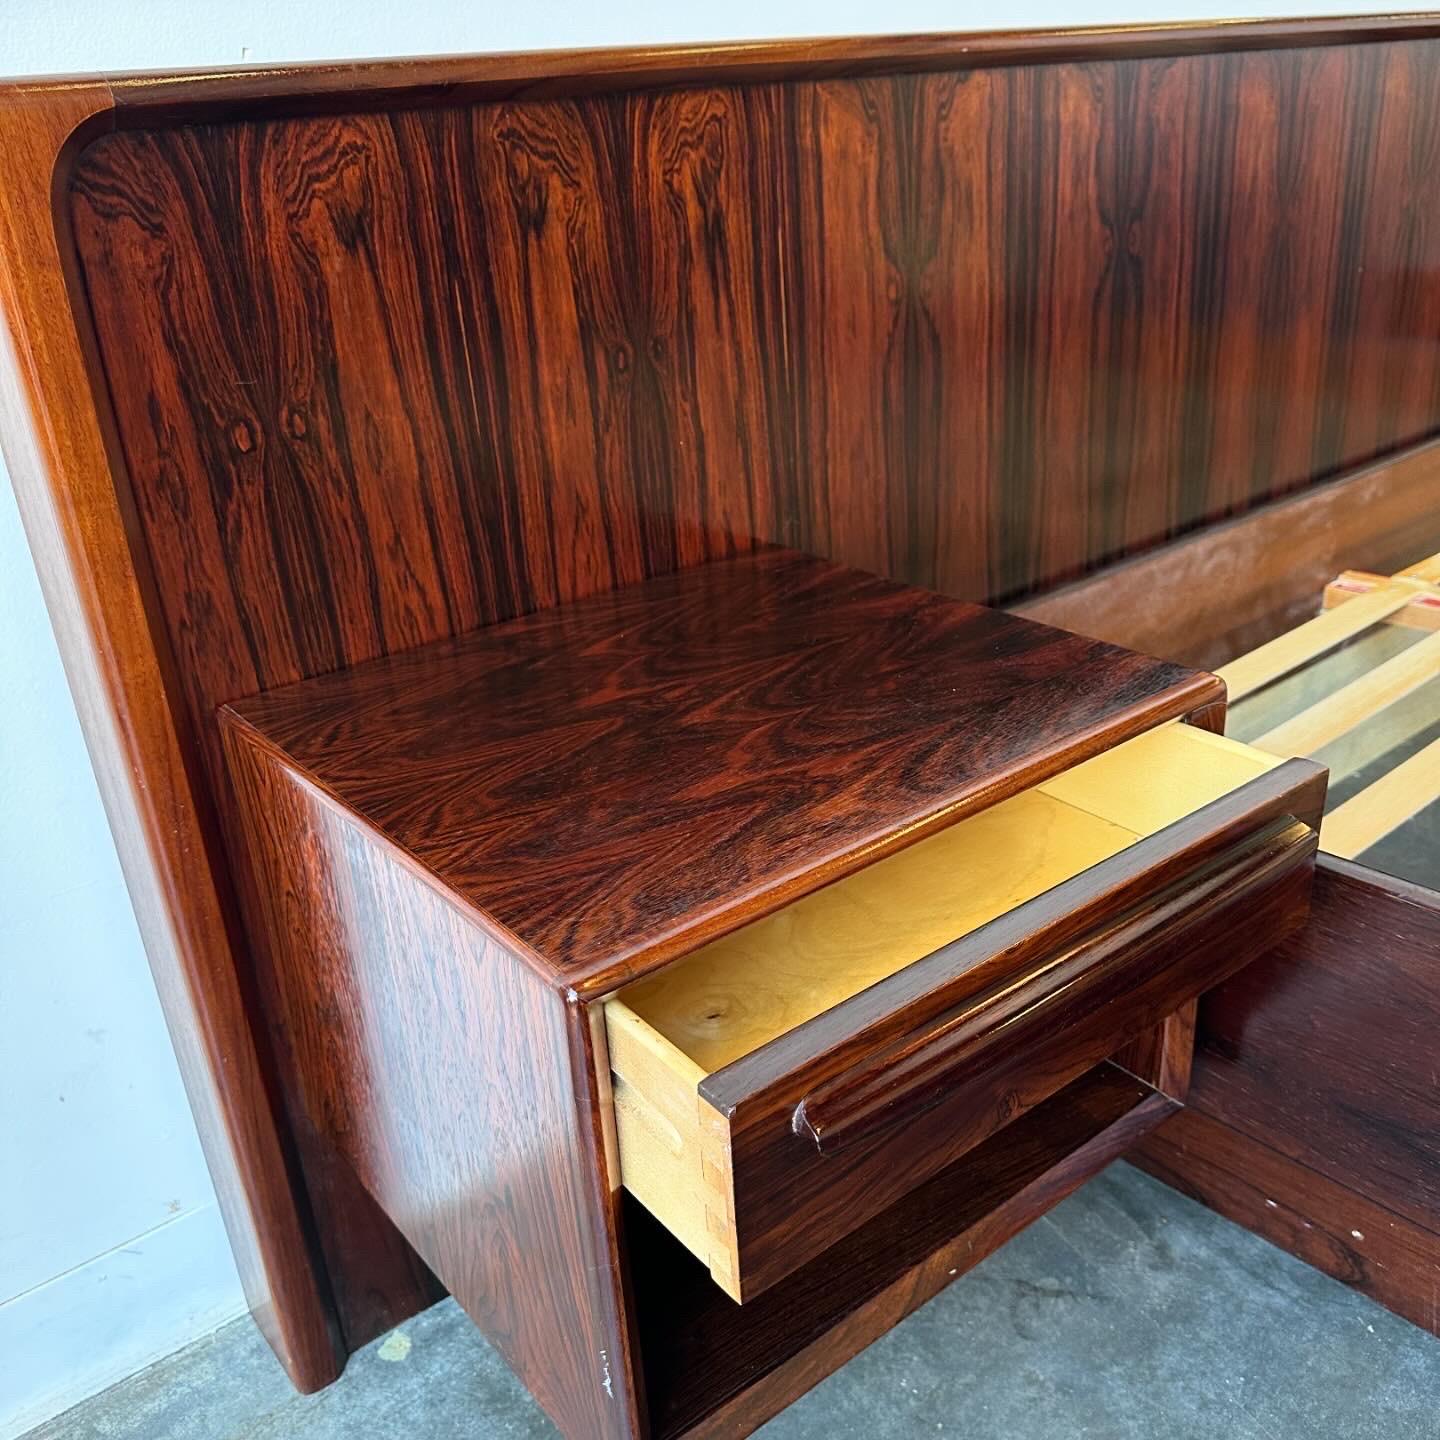 Danish Mid Century Modern Rosewood Queen Size Platform Bed with floating nightstands.

Stunning set in excellent condition by Westofa circa 1970.

Dimensions:
101 1/2” W
63” W
85” L 
15 1/2” bed height 
33 1/2” headboard height